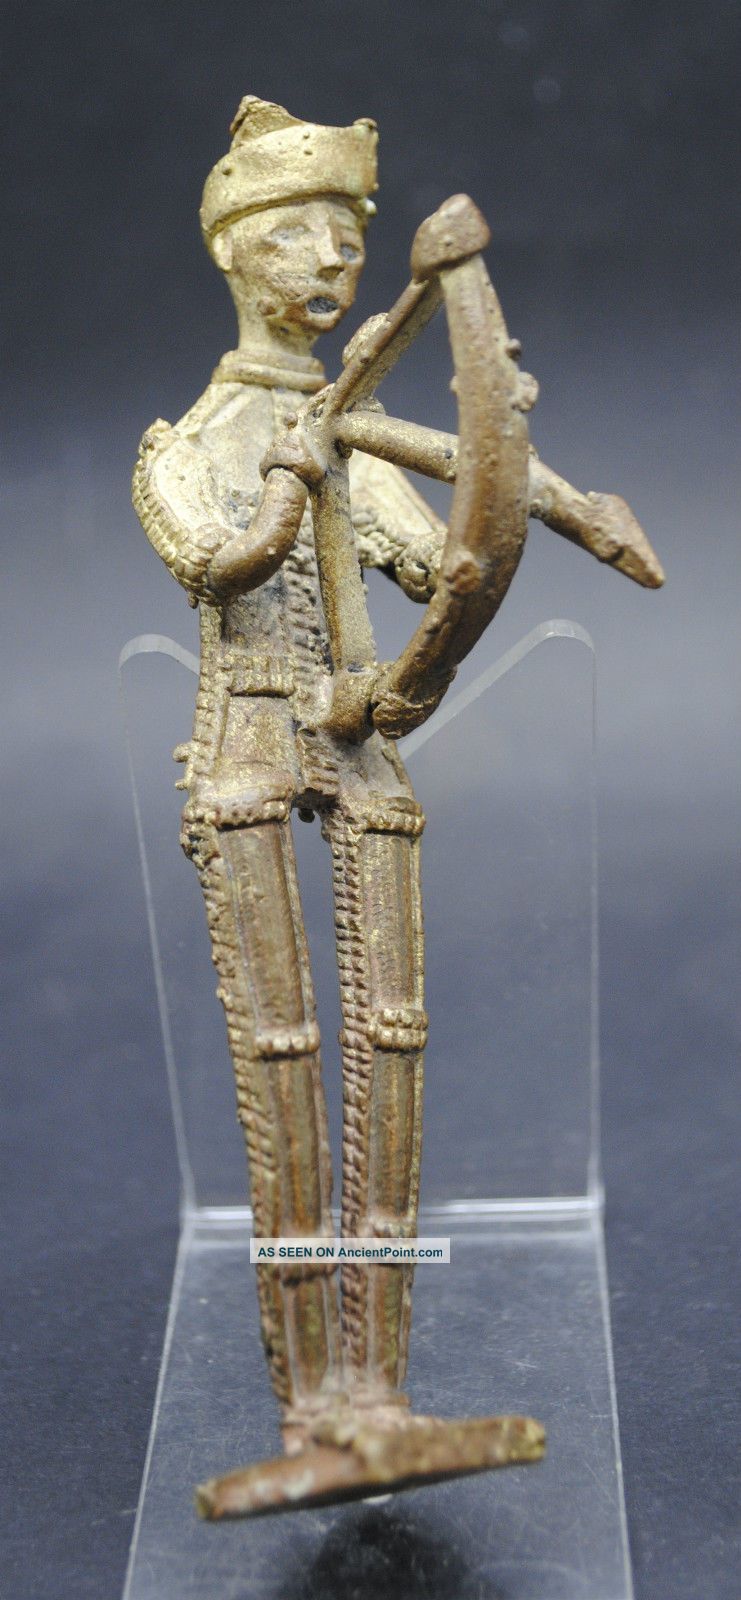 Lovely Antique Indian Bronze Figurine Of An Archer 17th - 18th Century Ad Near Eastern photo